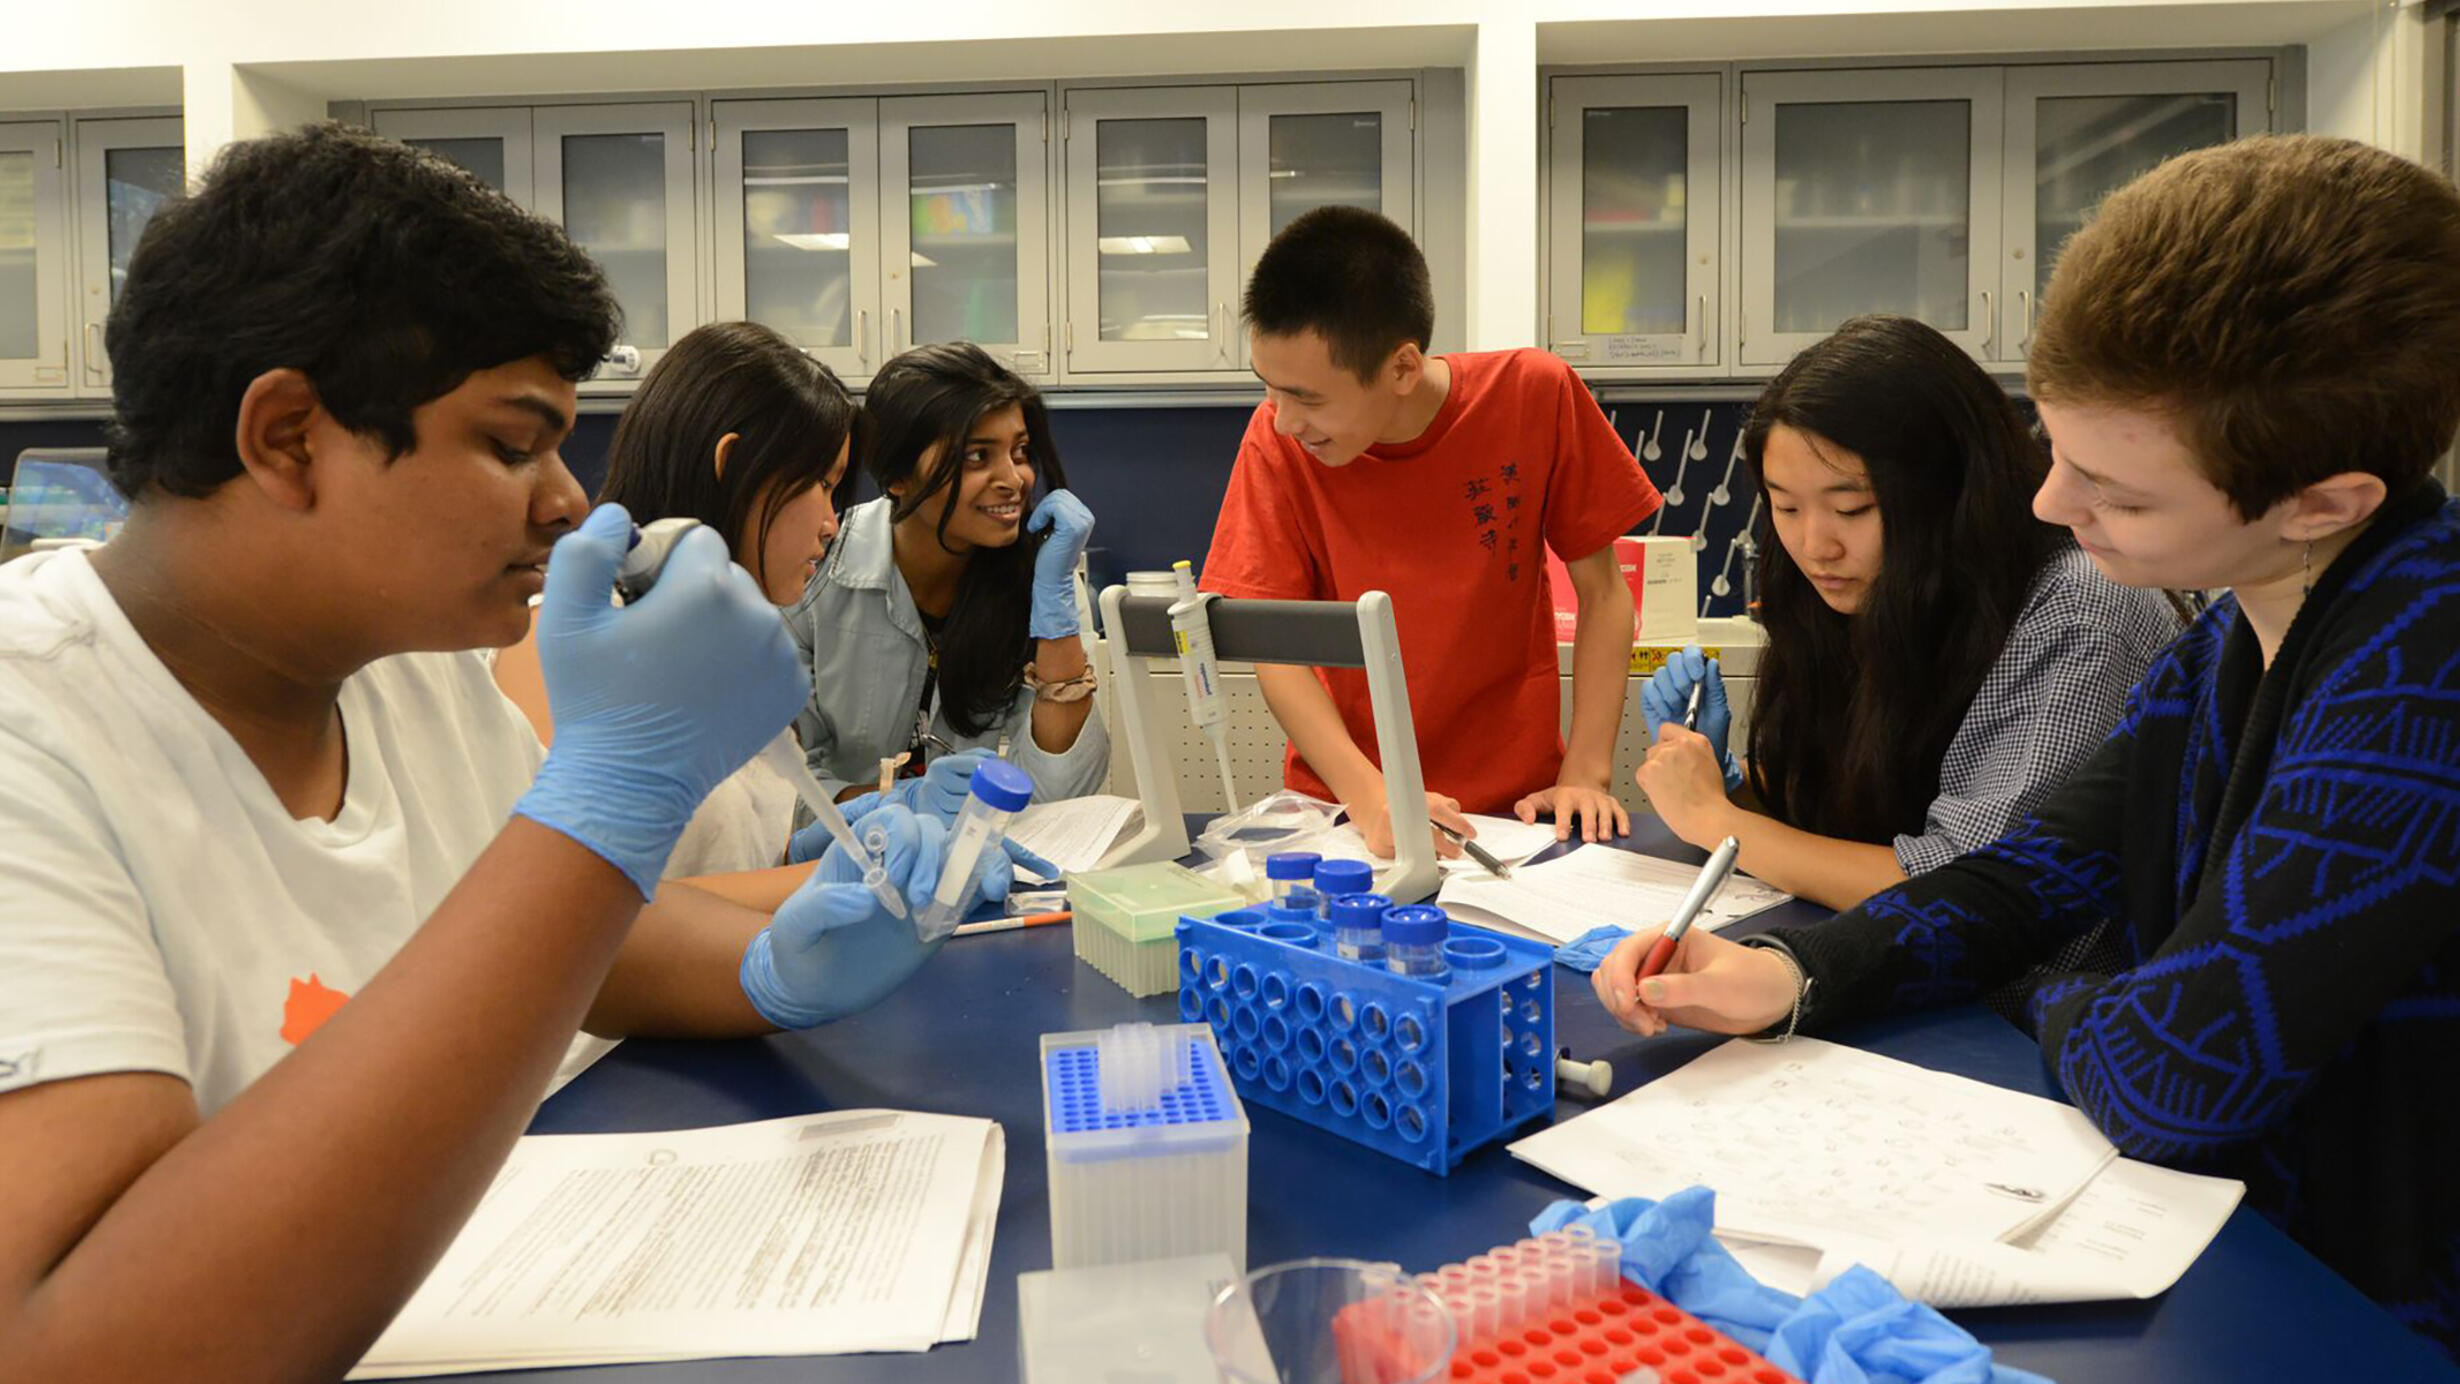 New York City High School students at lab table with DNA samples testing in an American Museum of Natural History classroom.